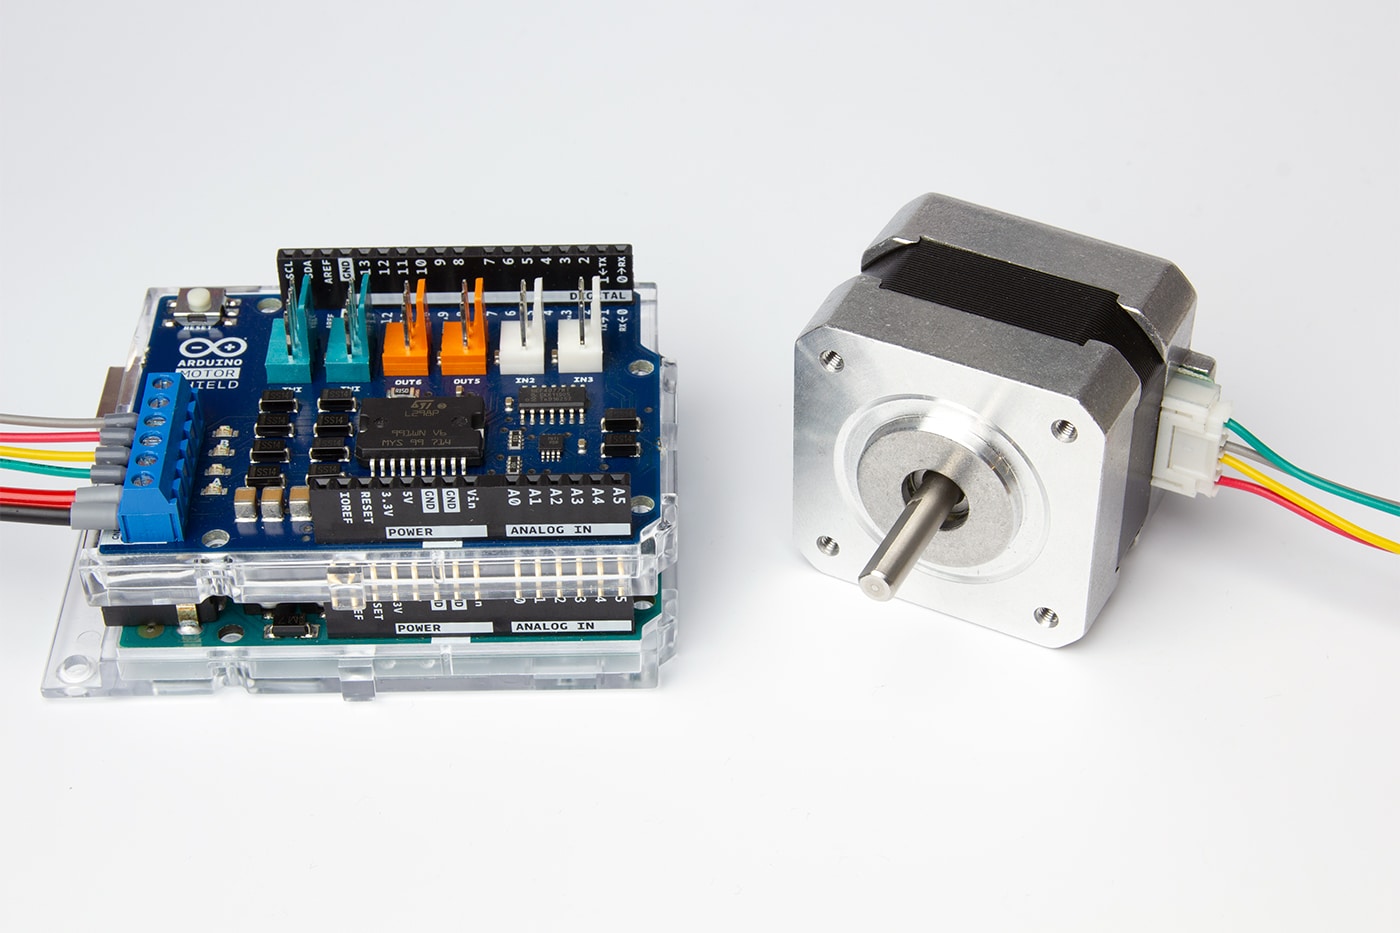 How to drive a stepper motor?